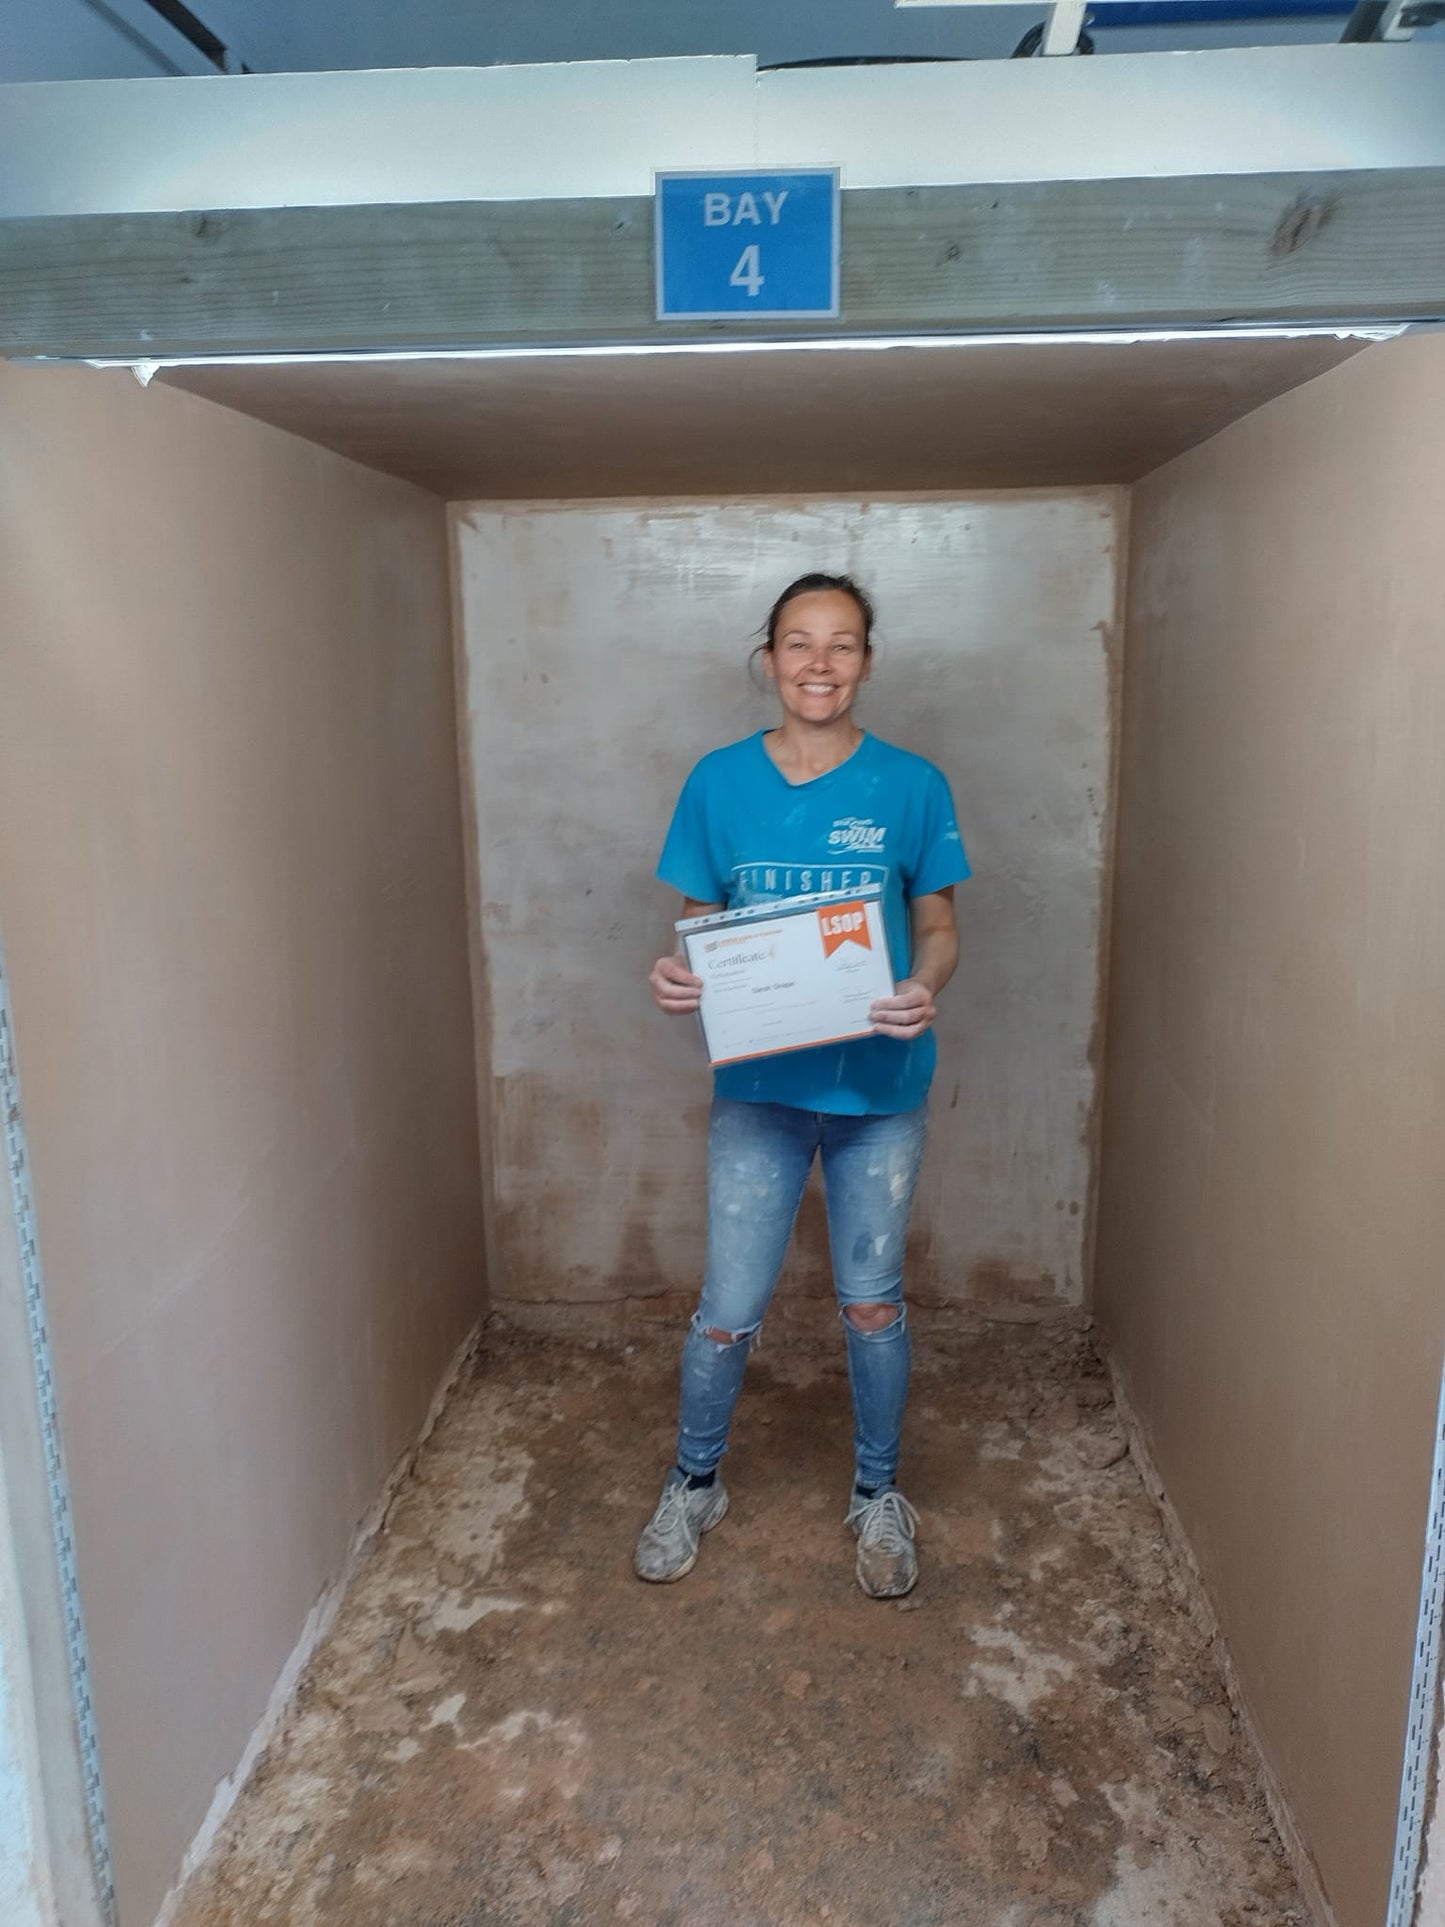 Flexible Plastering Course (Skimming + Boarding)